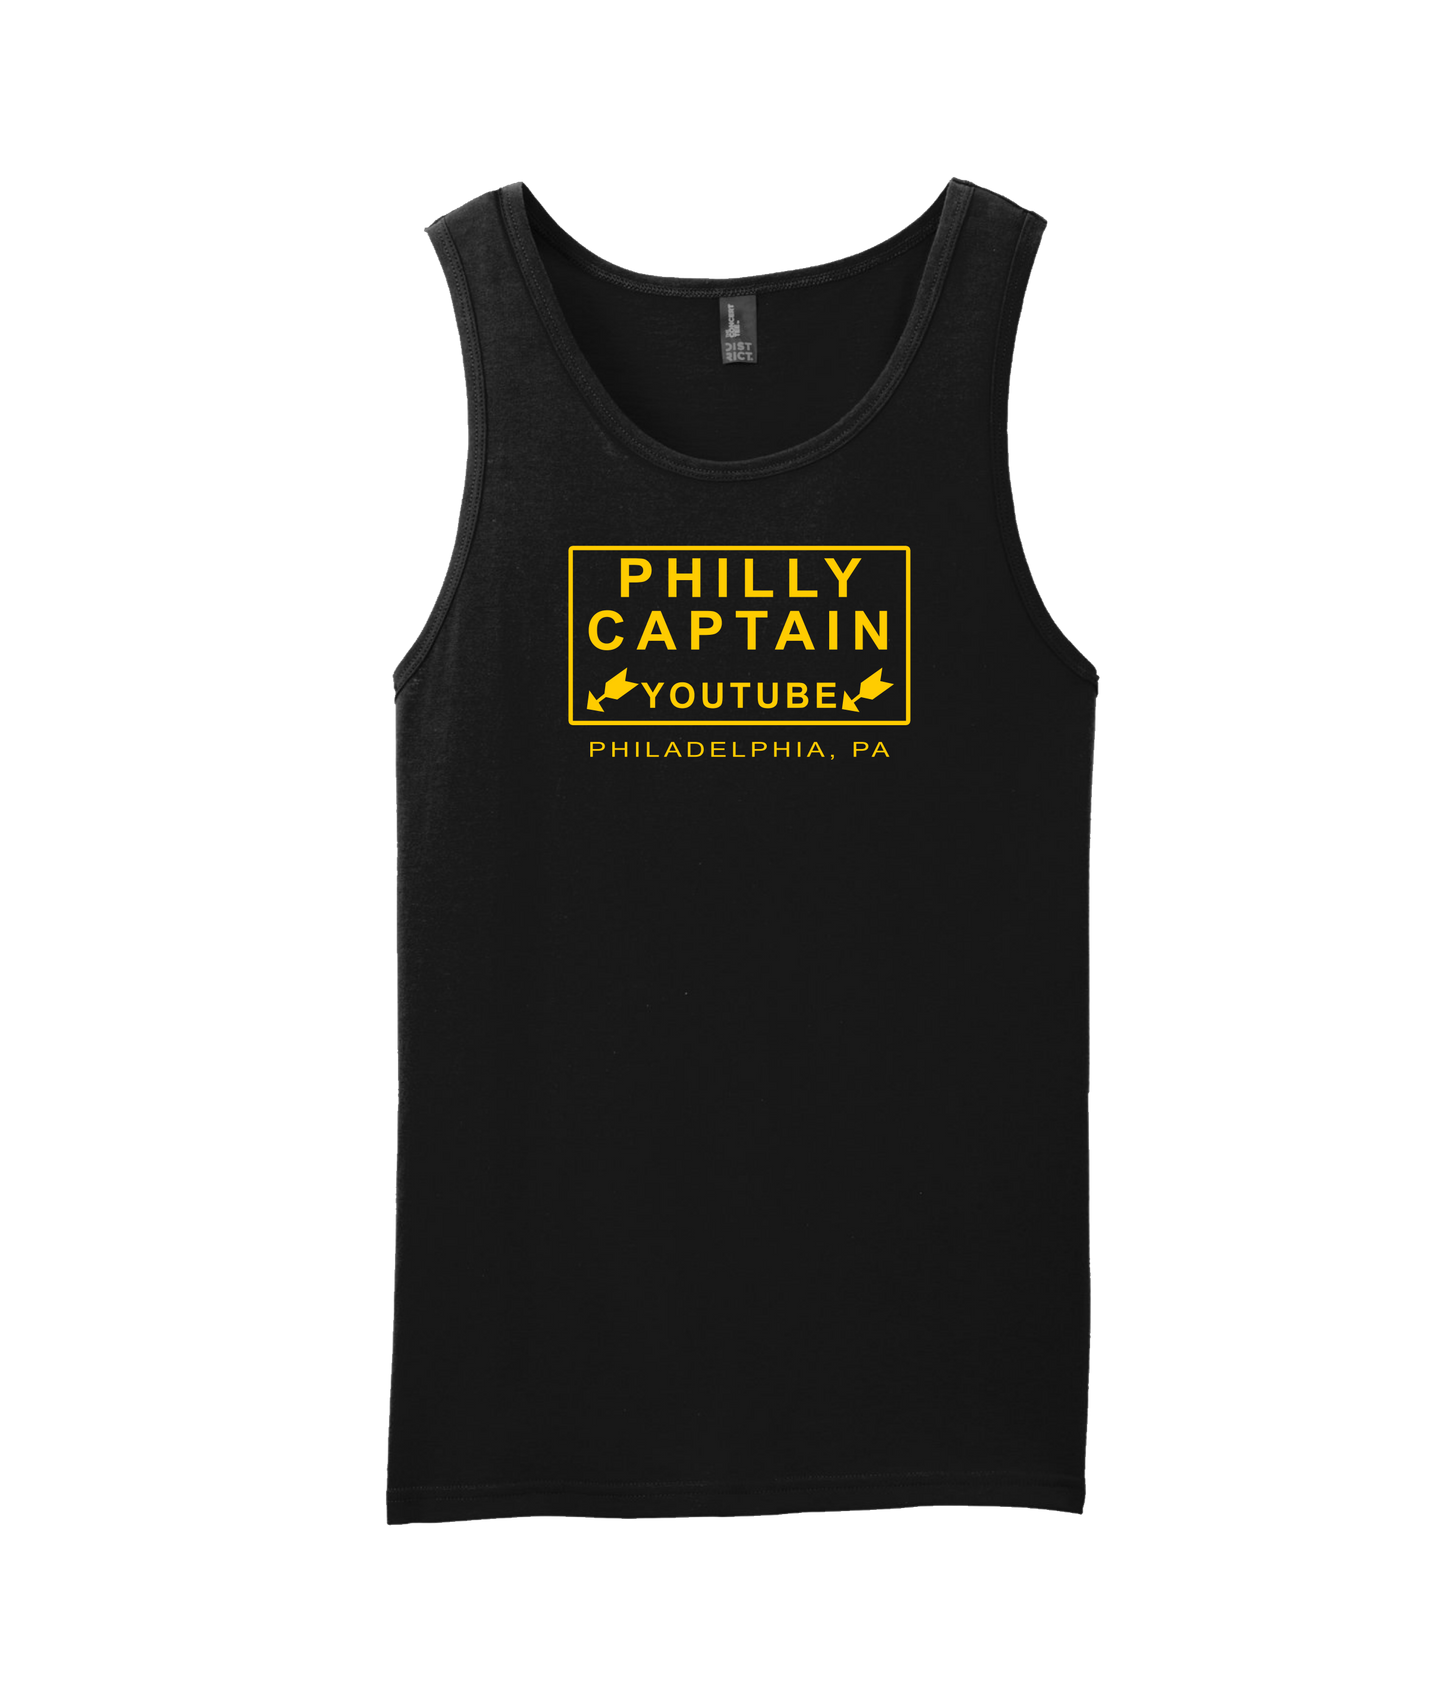 The Philly Captain's Merch is Fire - YouTube - Black Tank Top